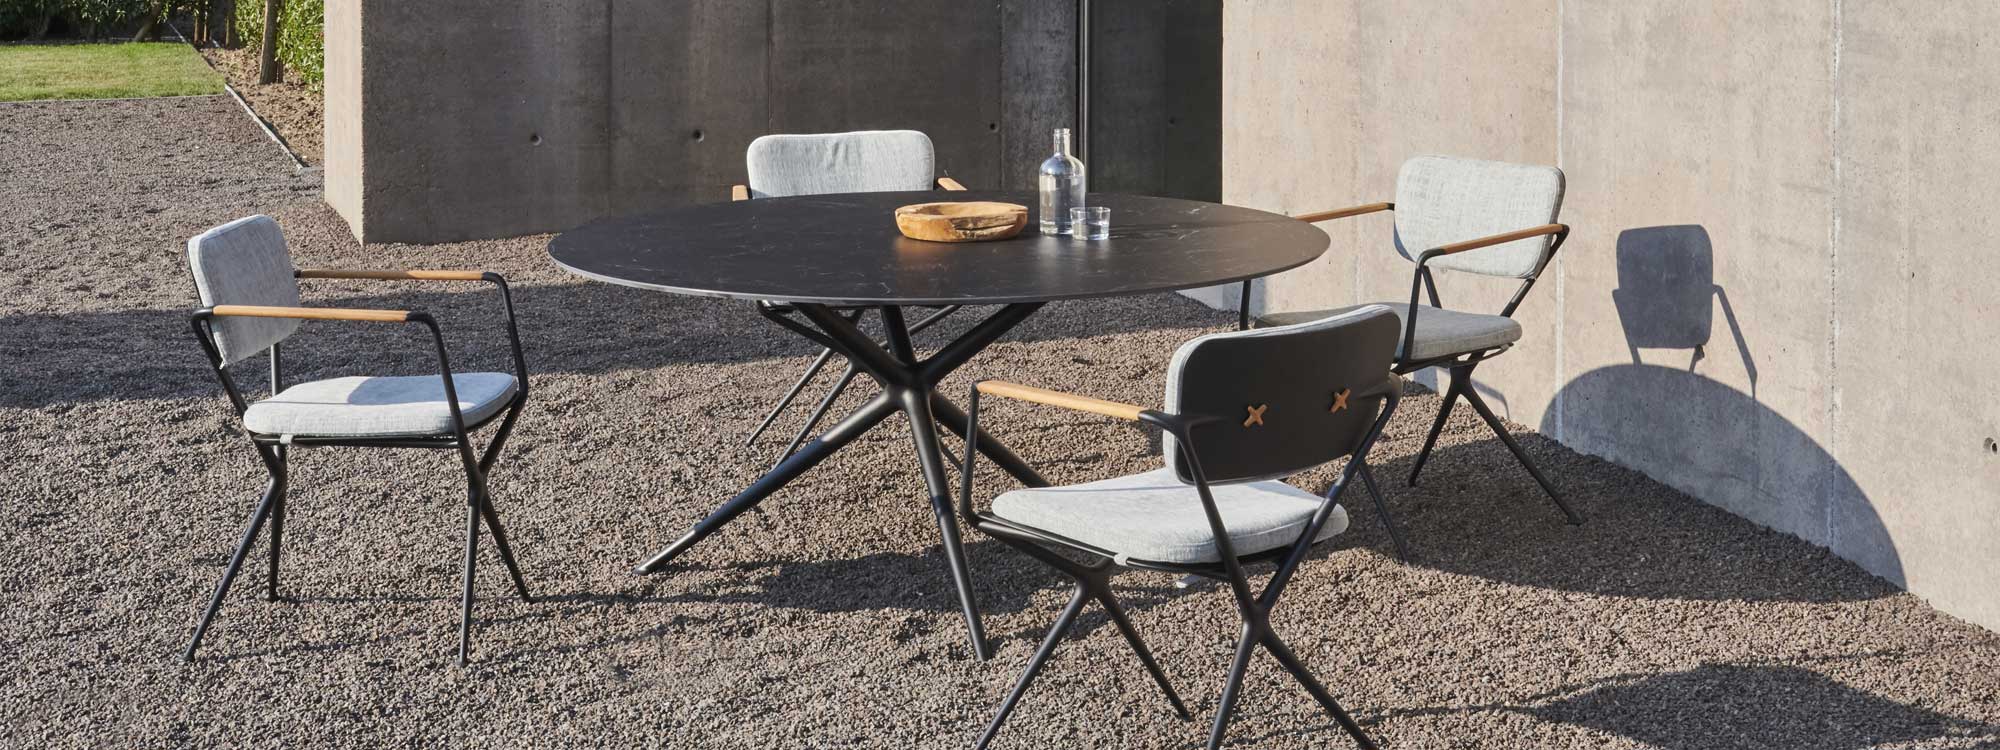 Image of circular Exes table with Nero Marquina ceramic top and anthracite-colored Exes chairs by Royal Botania